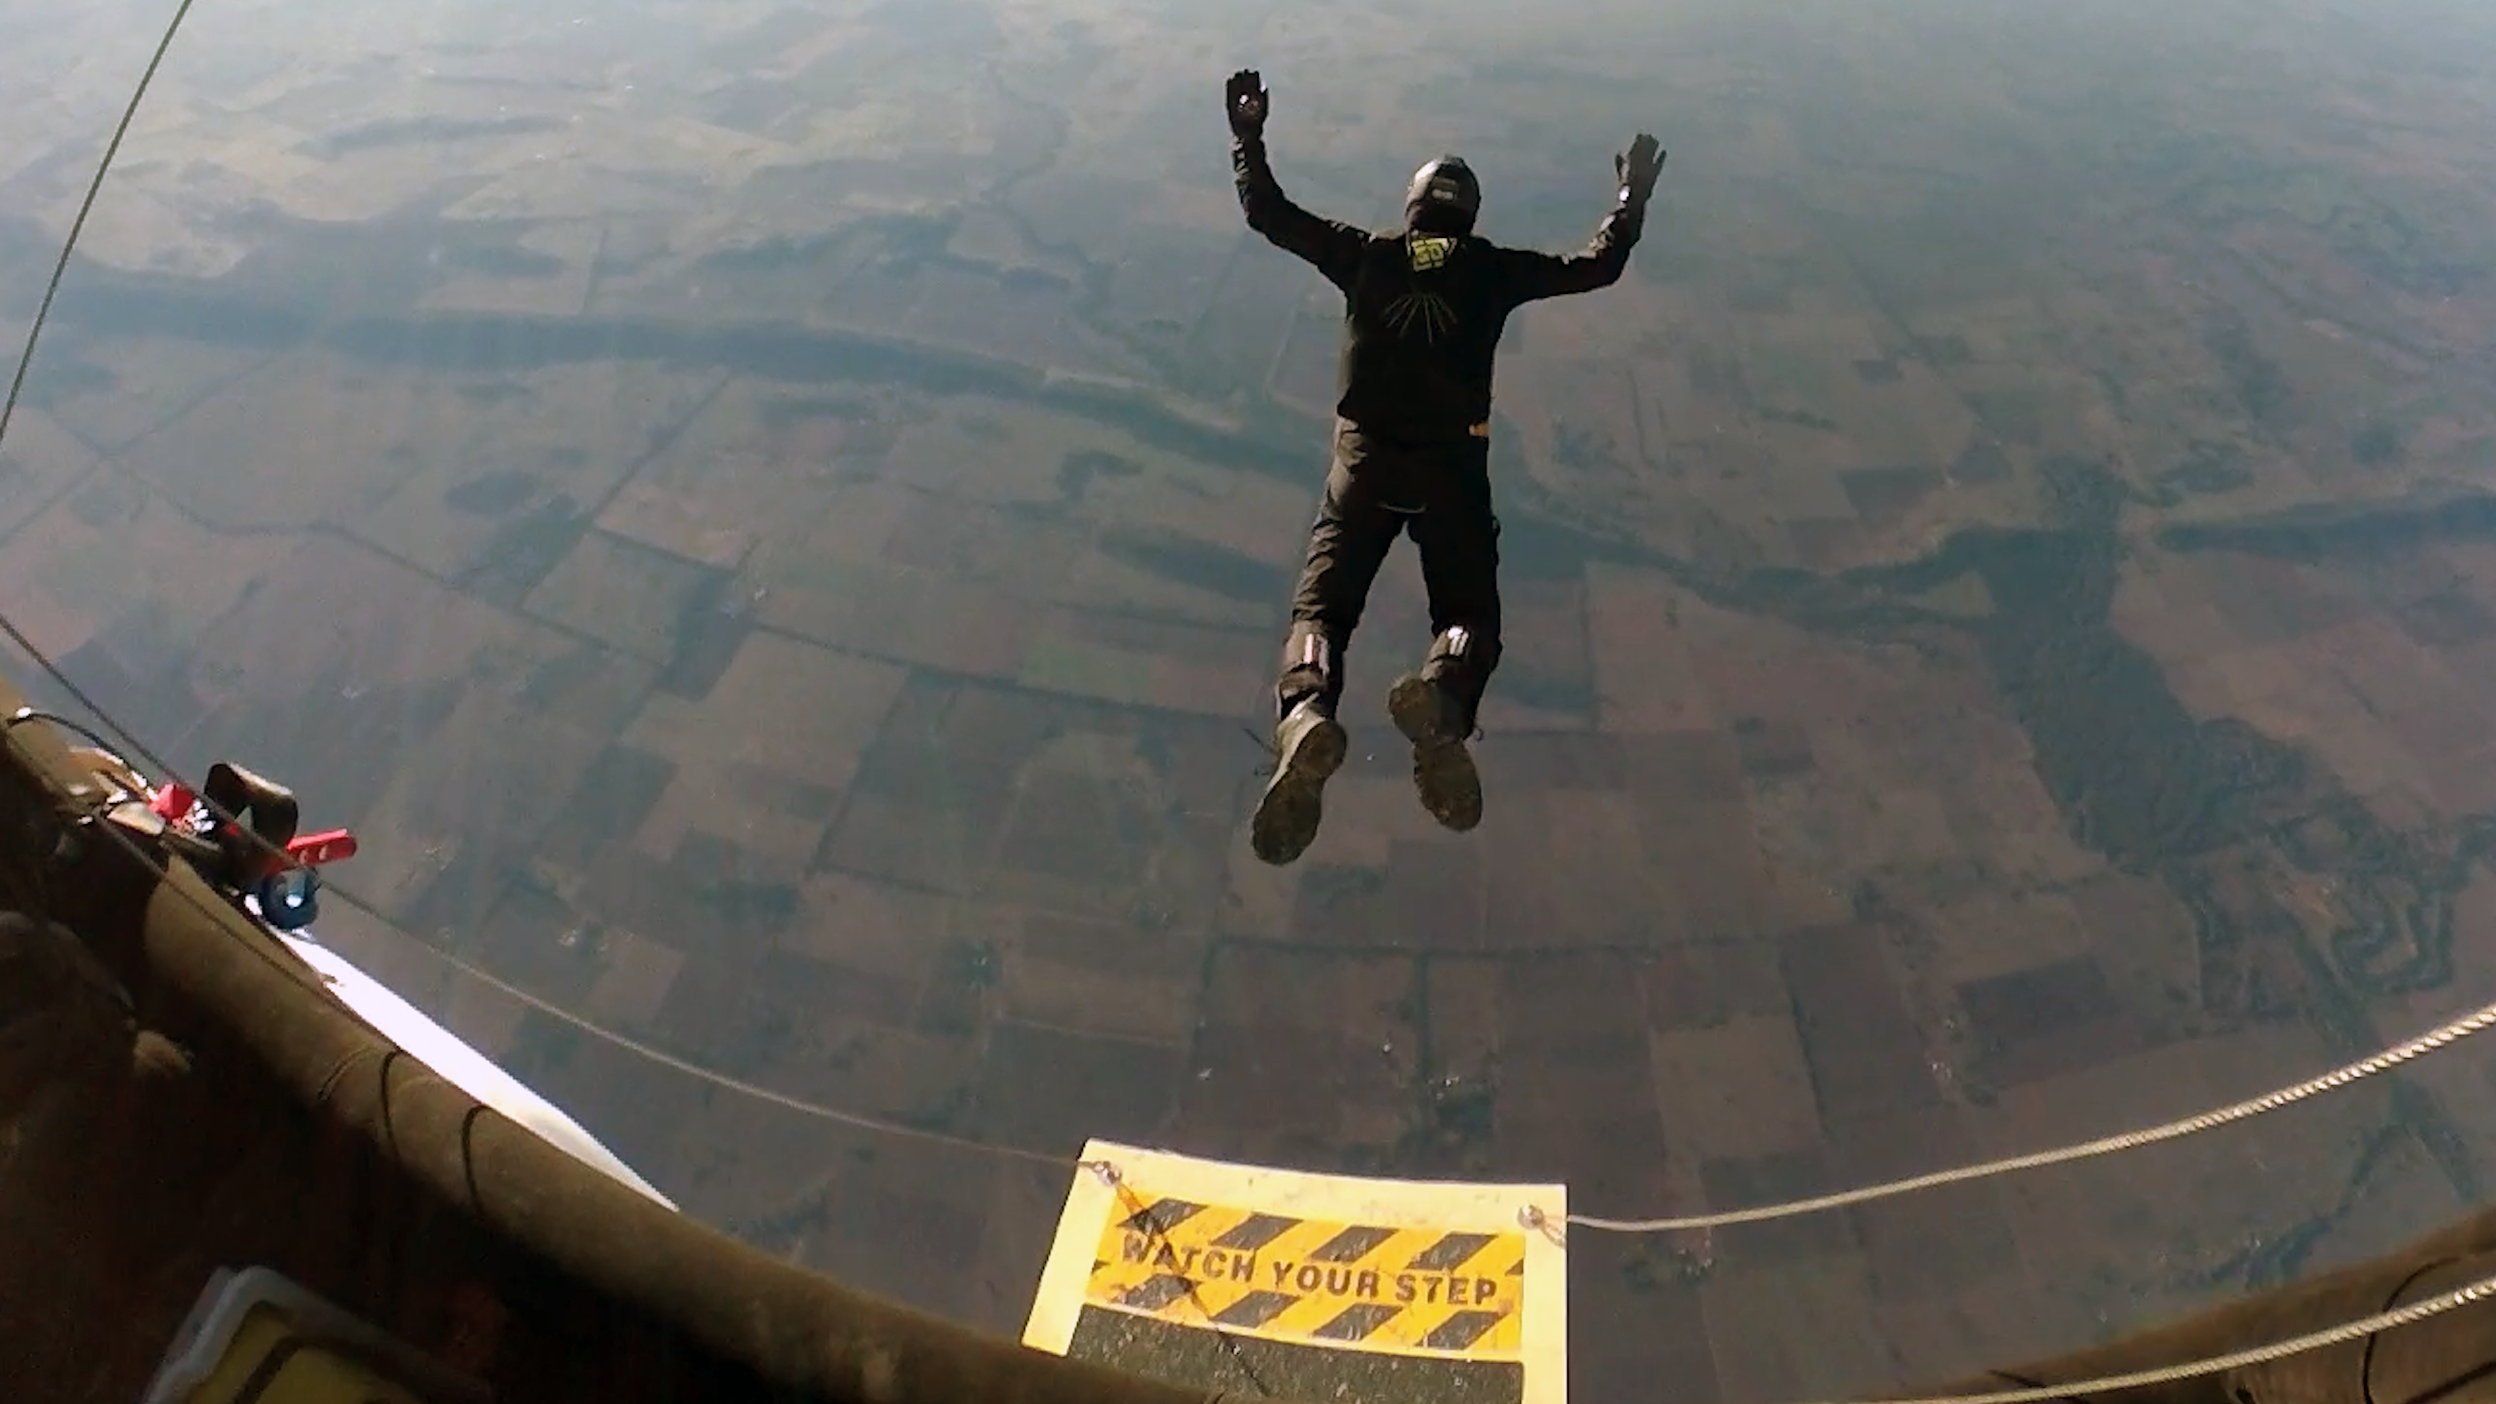 Skydiving into the jet stream, where no human has jumped before